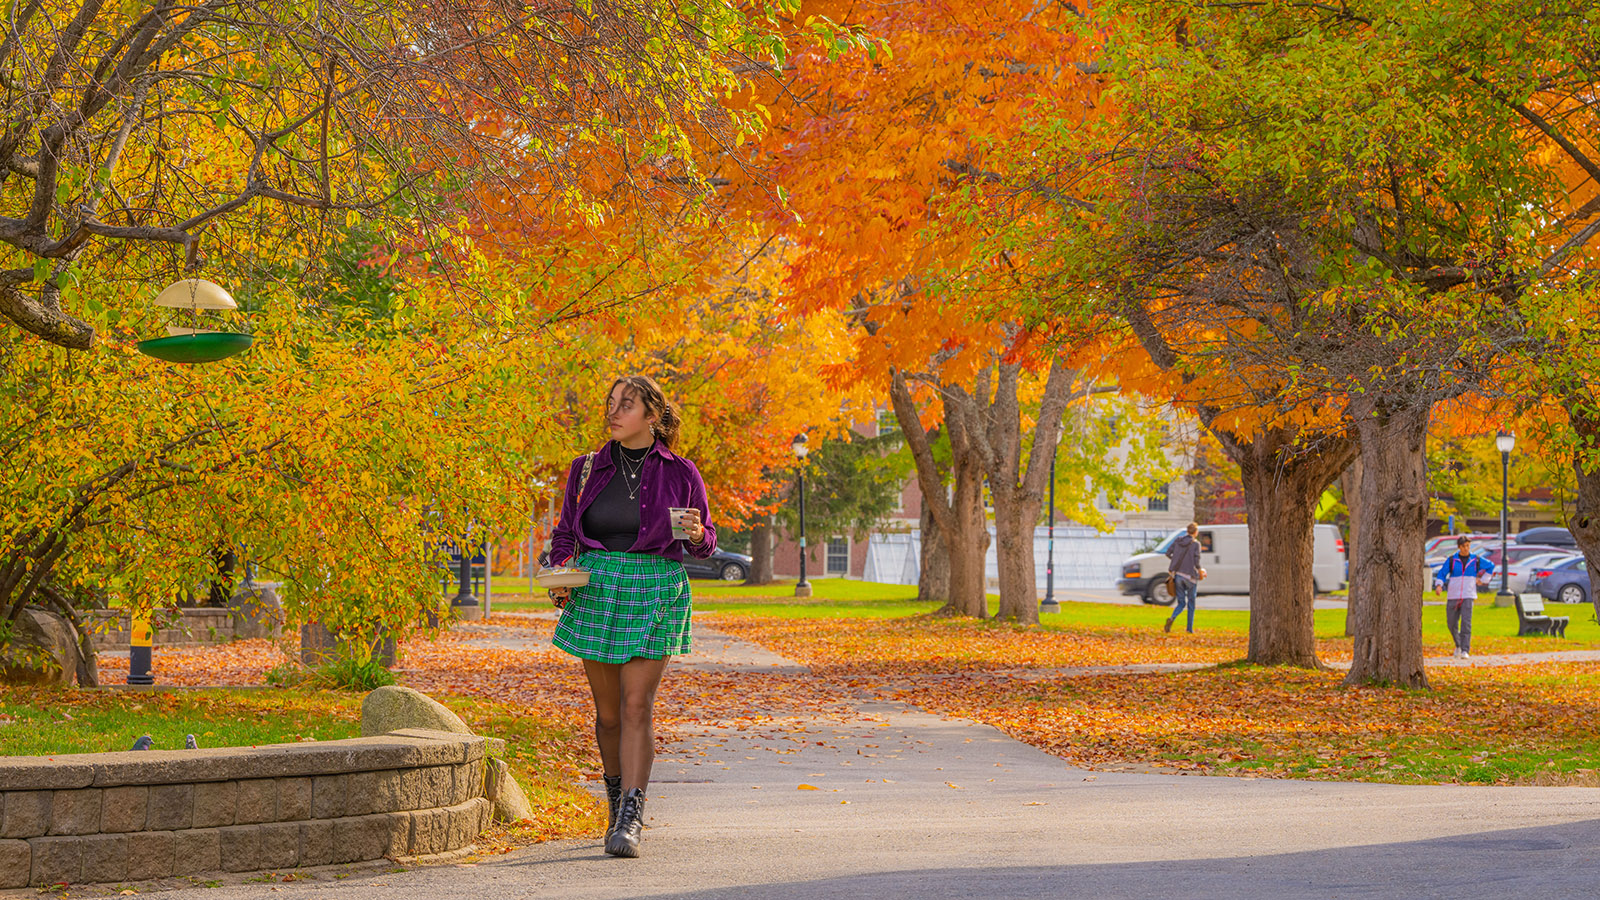 An outdoor photo of the UMaine campus taken October 2022, depicting a student walking a path on campus among the fall foliage